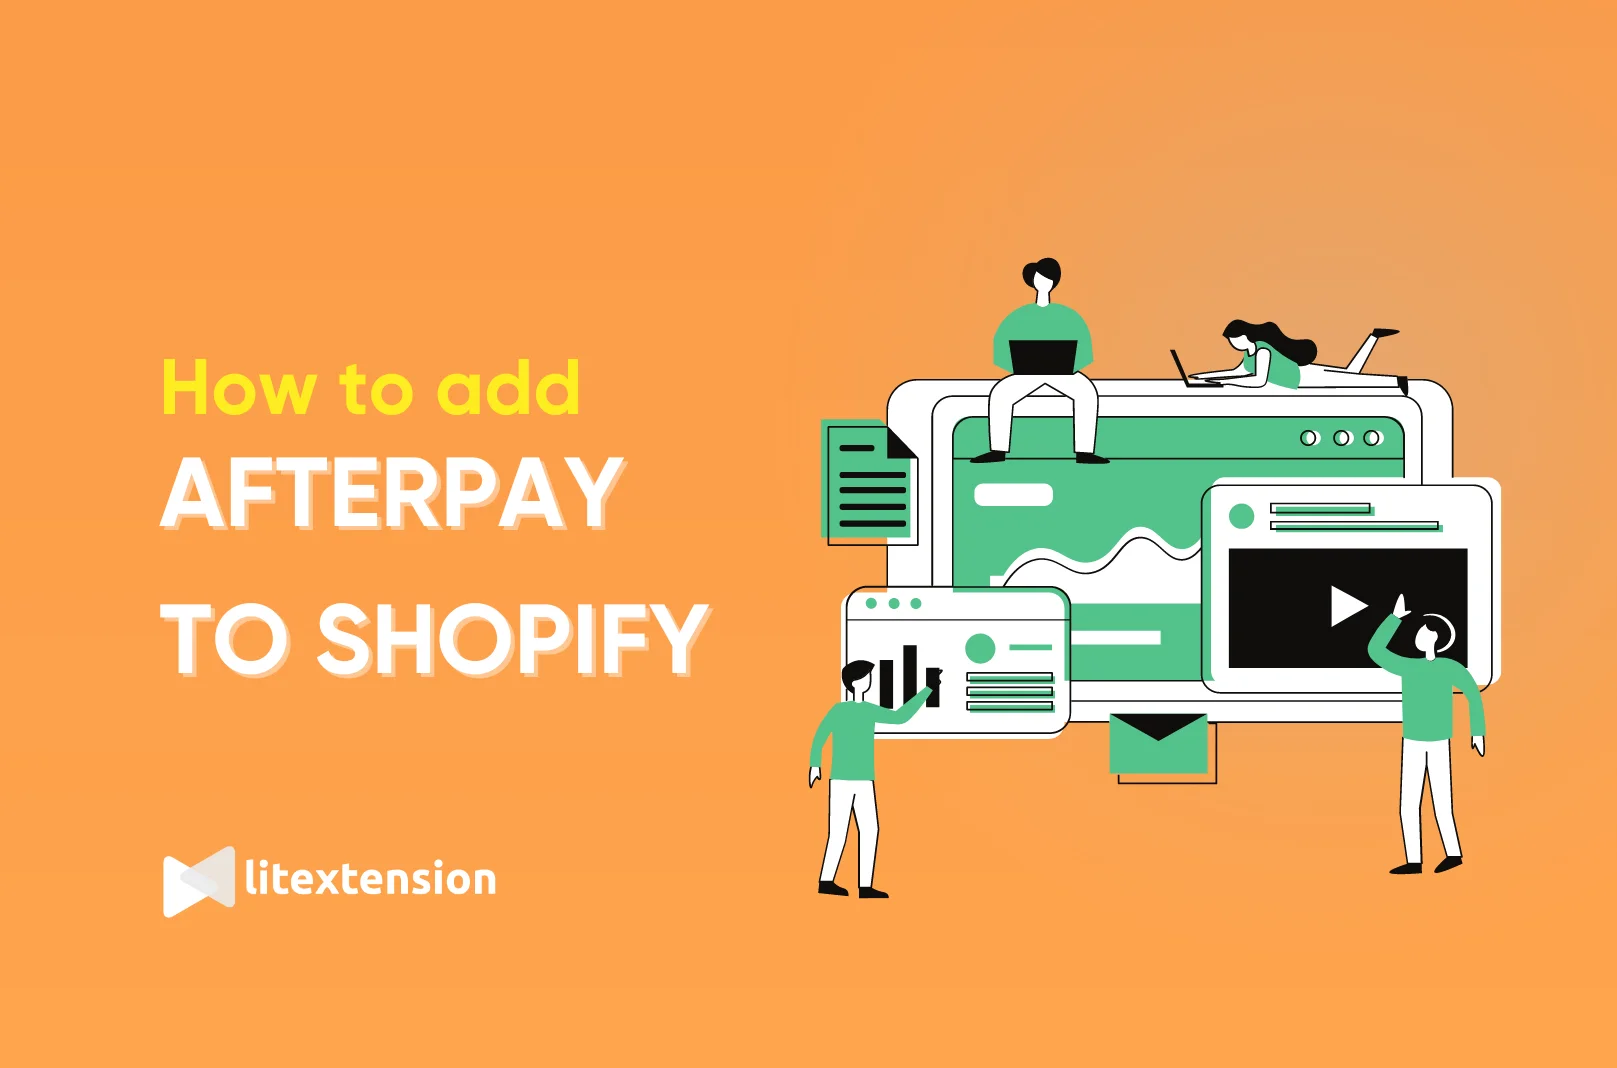 Afterpay: It's finally here!